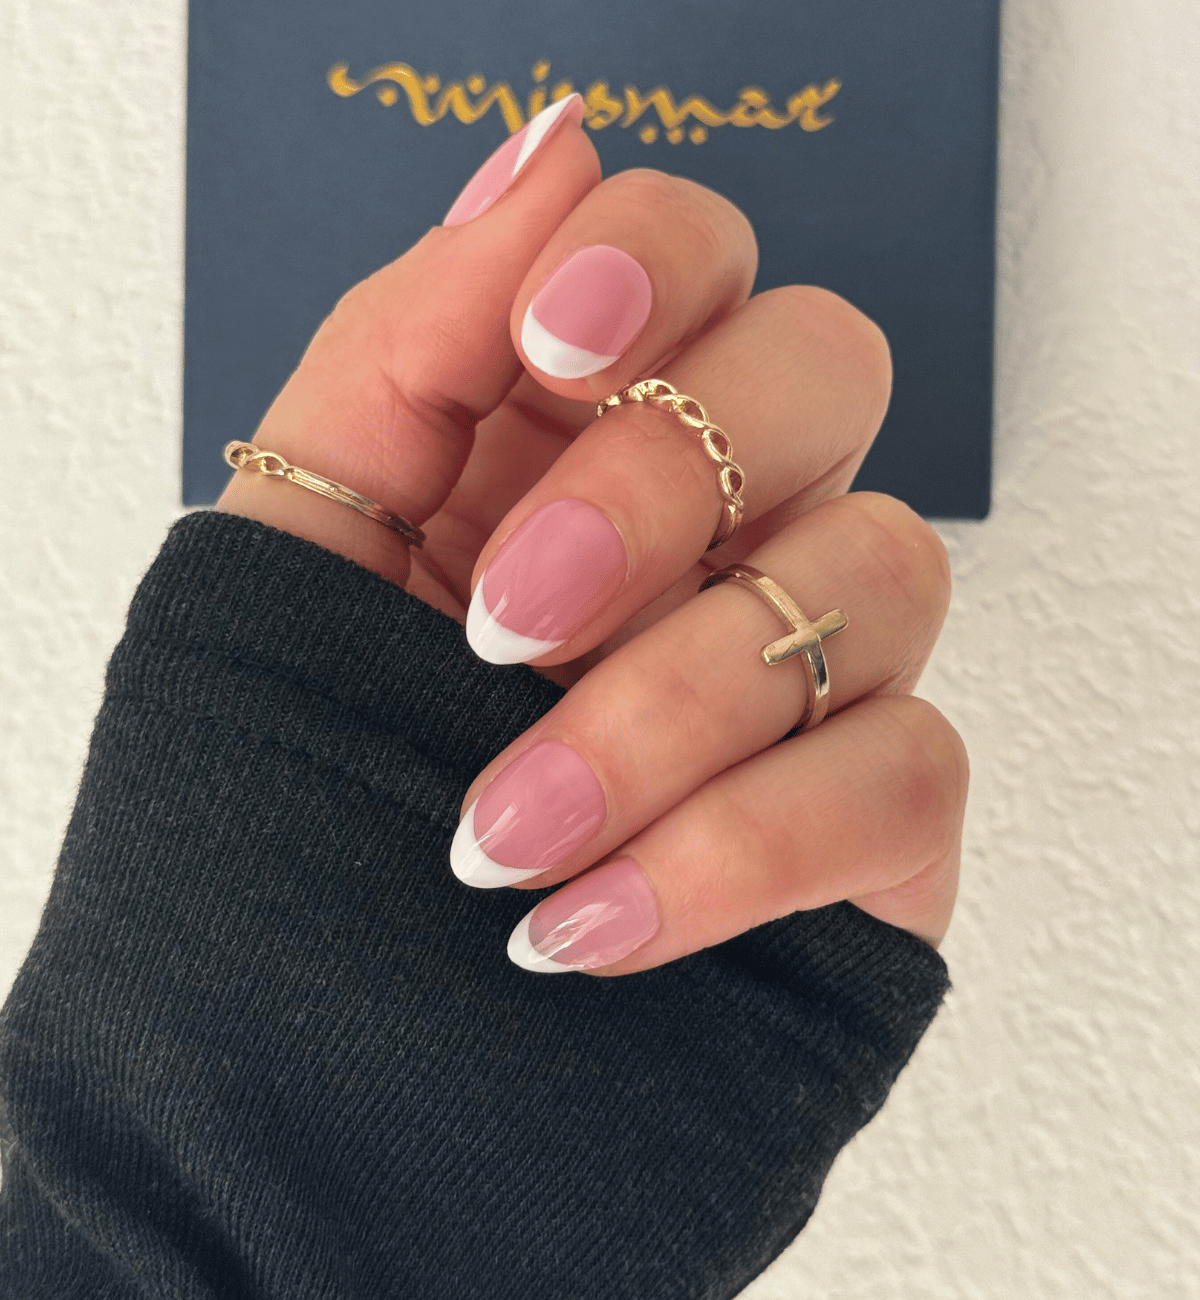 FAUX ONGLES FRENCH AMANDE COURT